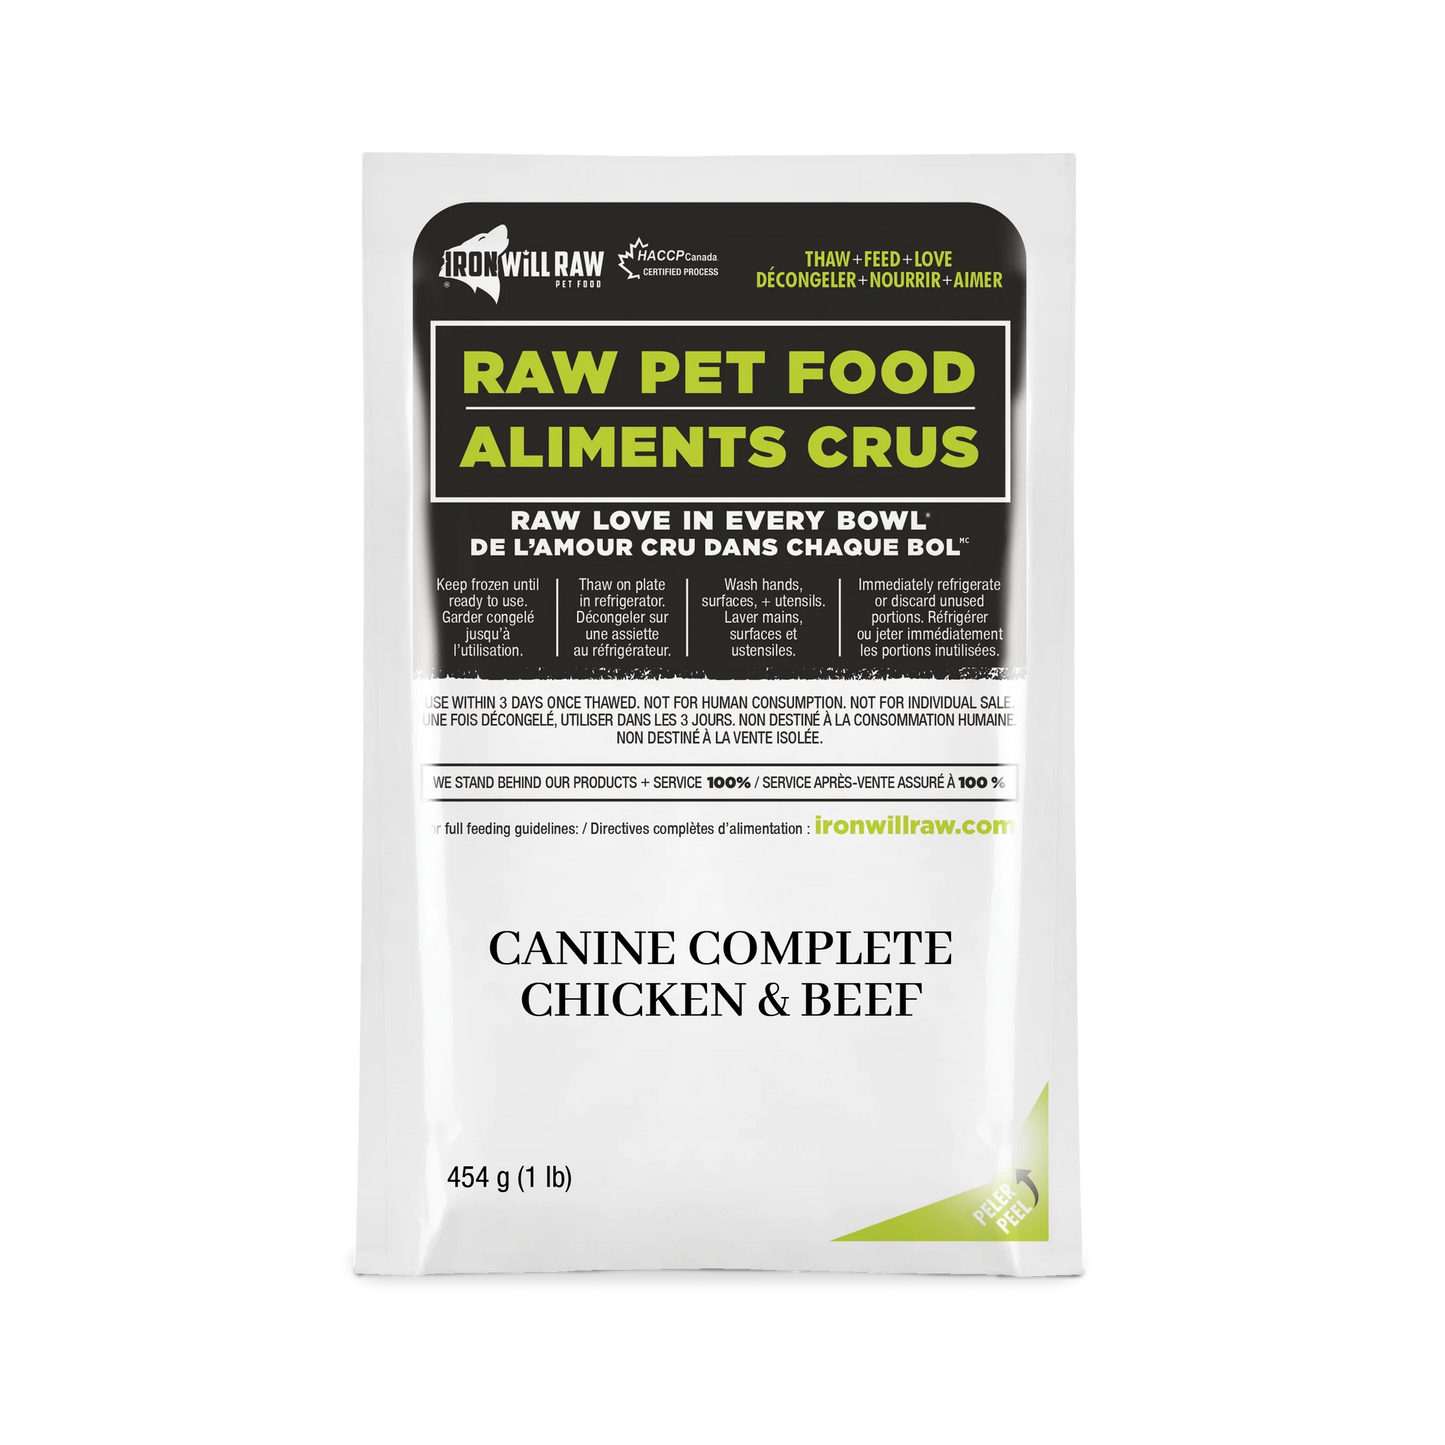 Iron Will Raw Canine Complete Chicken & Beef Dinner  Dog Food Frozen  | PetMax Canada